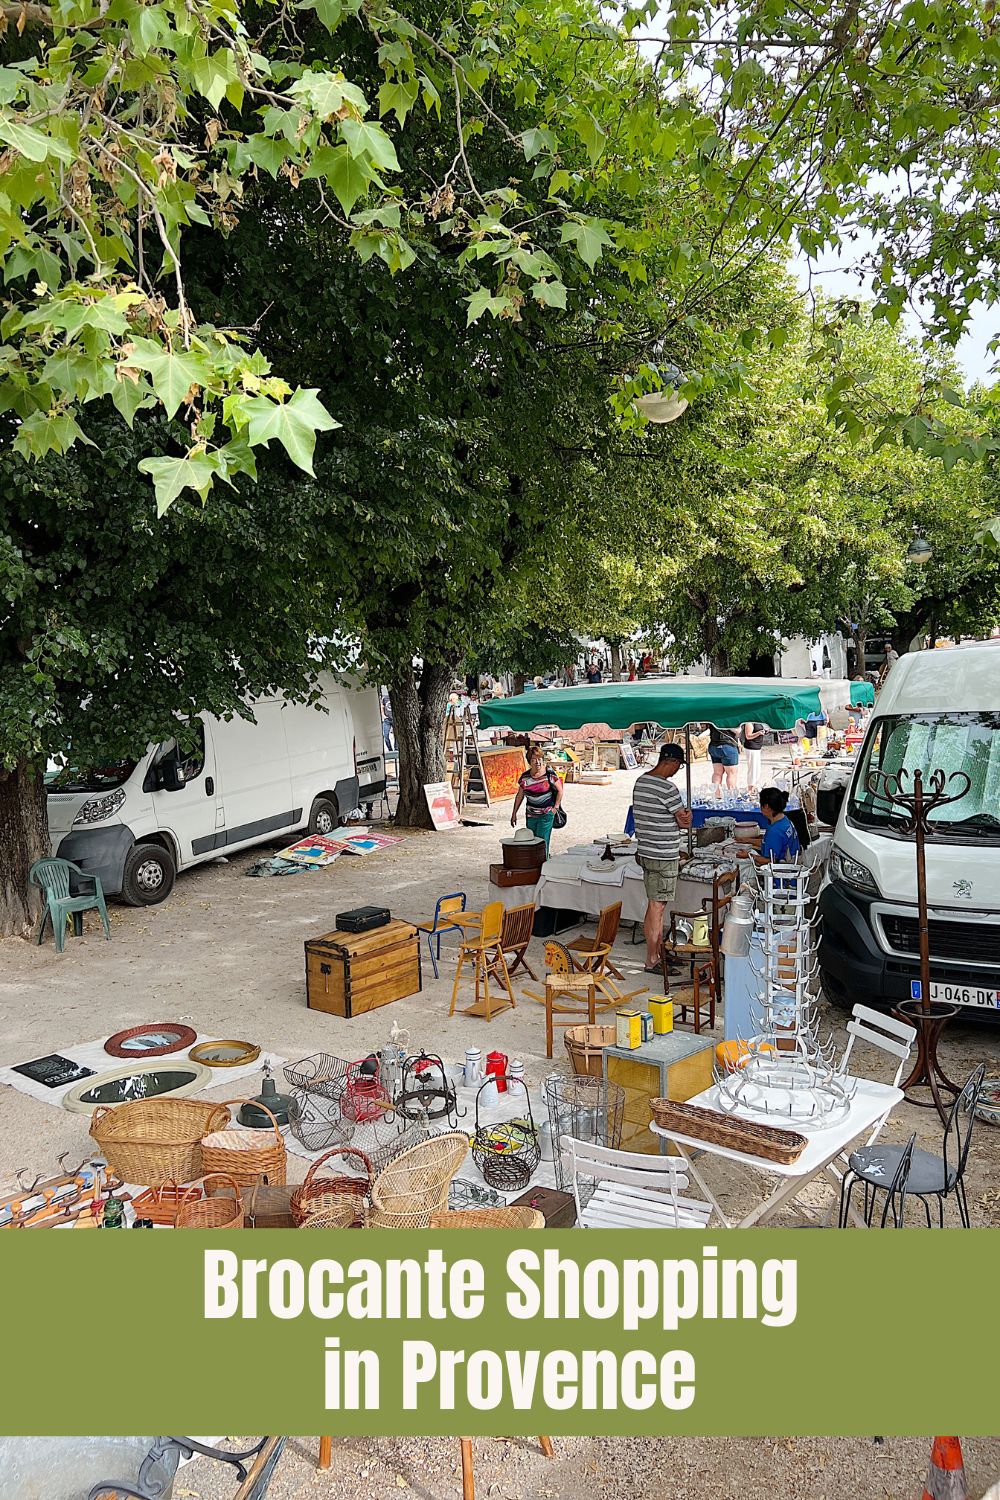 Today was a busy day in Provence! We started in Salut and shopped our first brocante. So many fun vintage items were found!